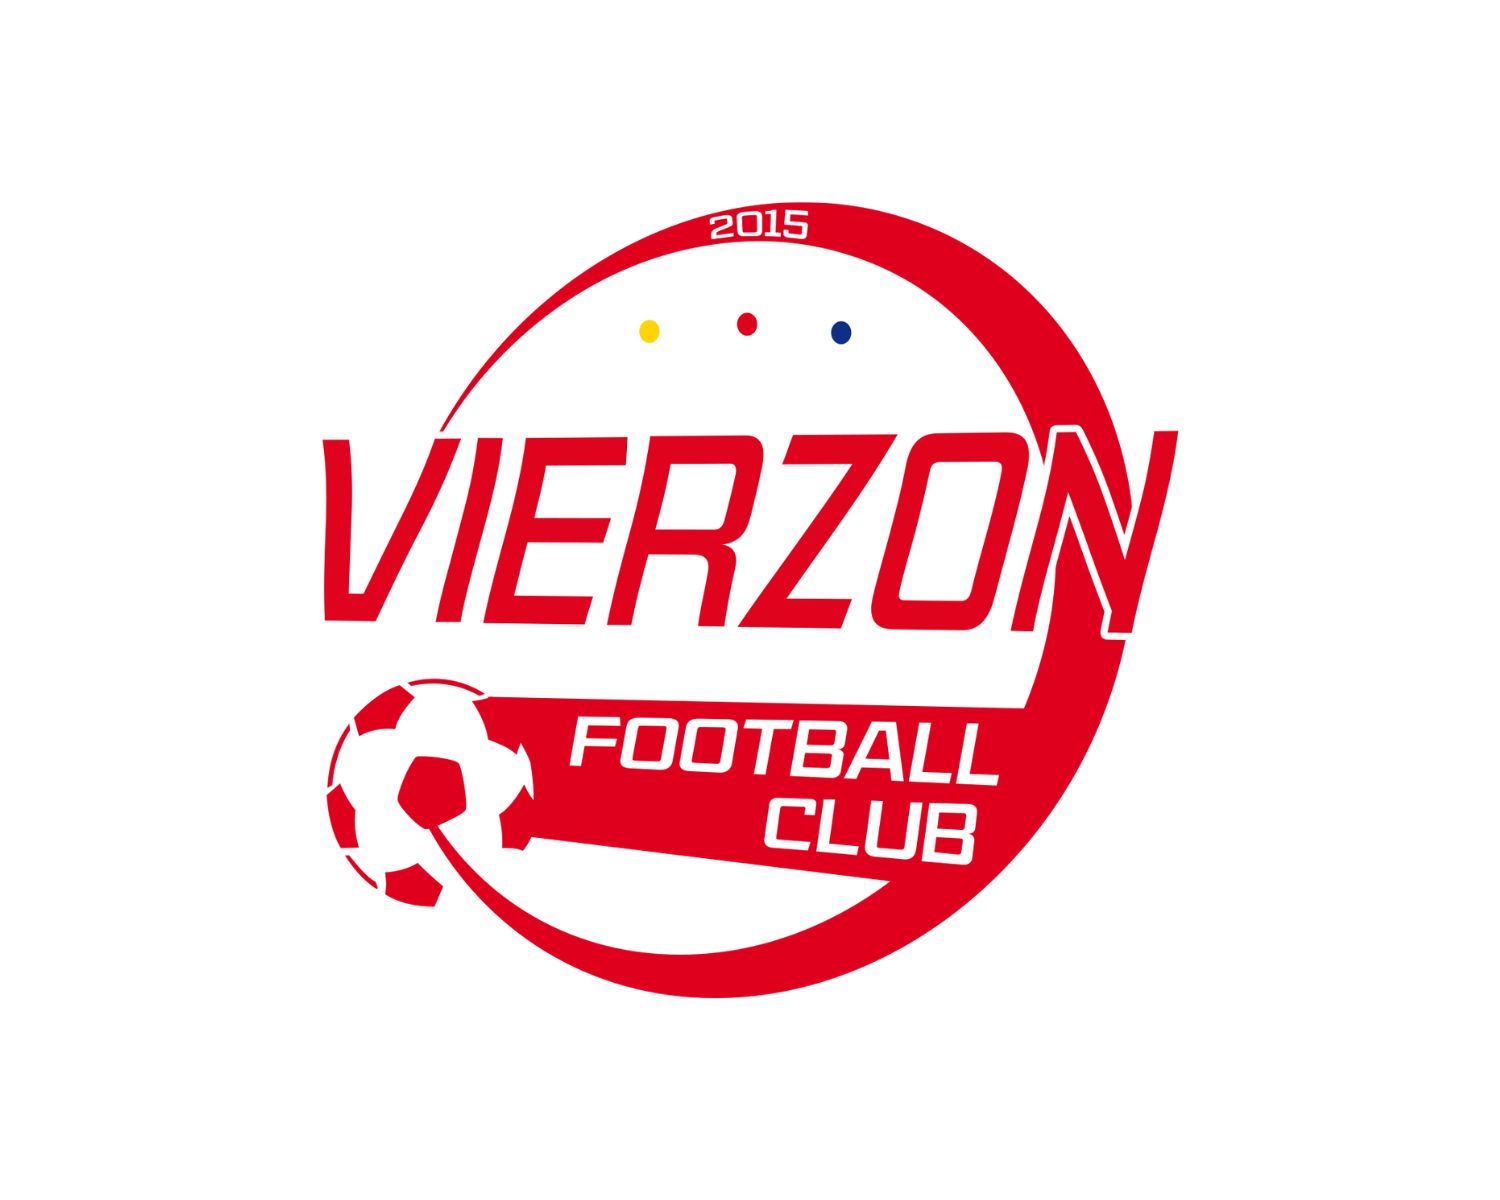 vierzon-foot-18-14-football-club-facts